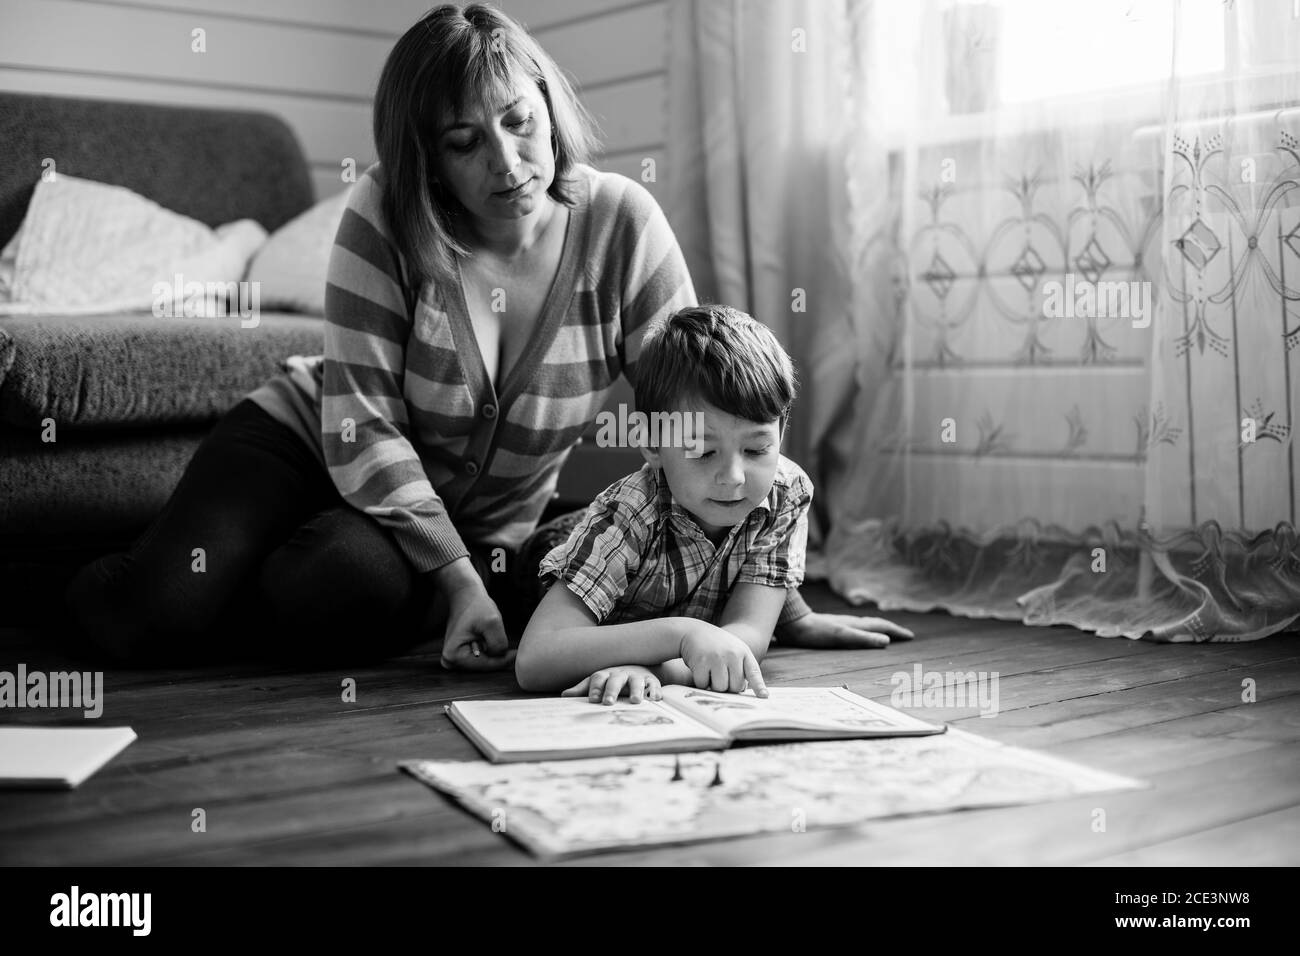 Young woman reading a book with her little son sitting on the floor in home. Black and white photography. Stock Photo